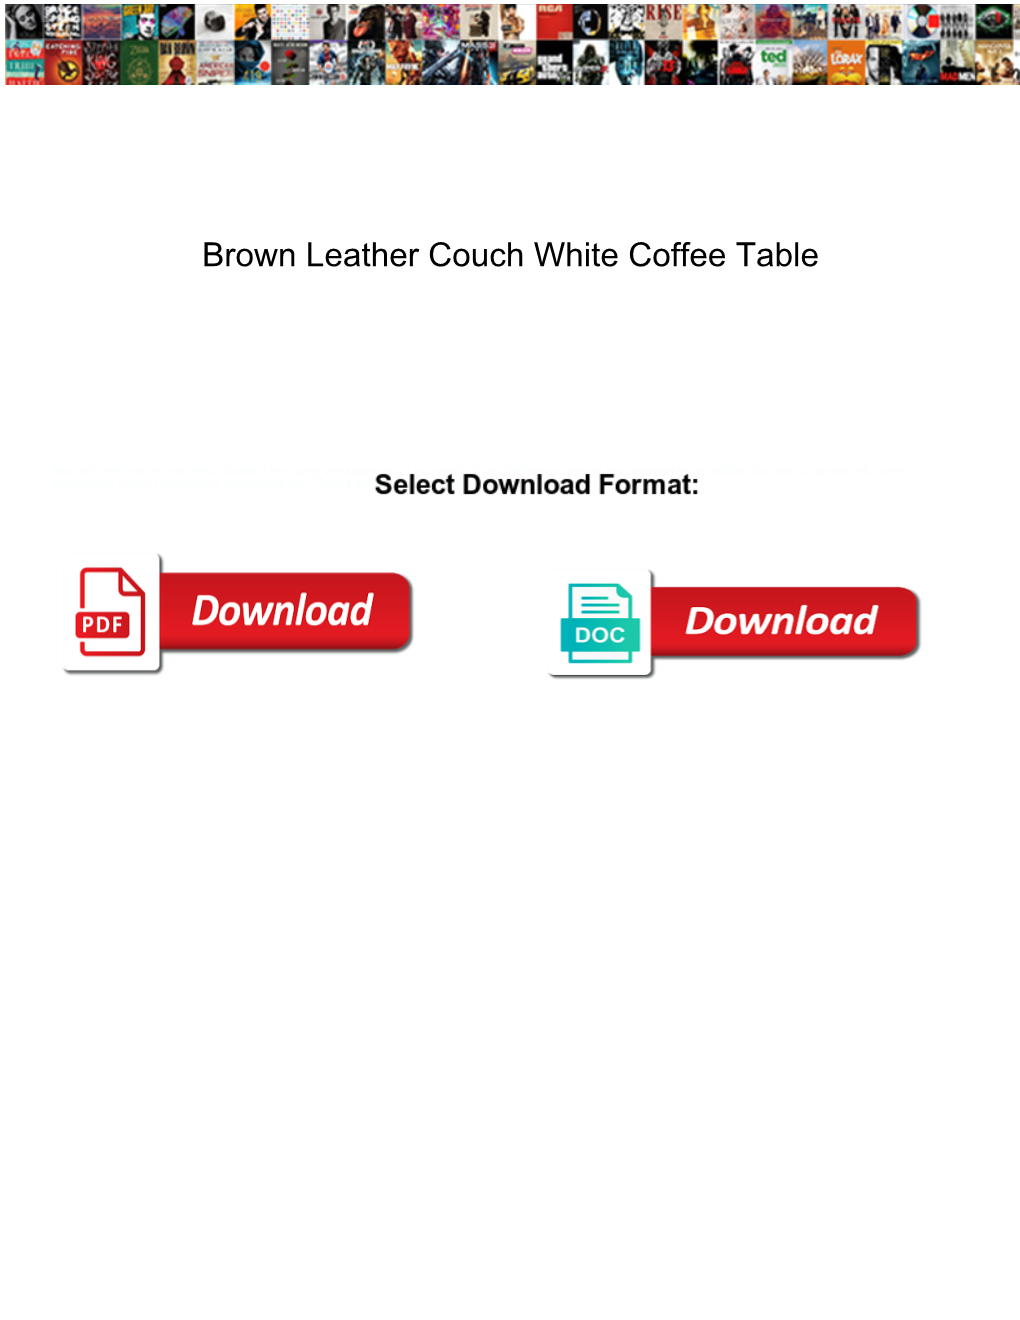 Brown Leather Couch White Coffee Table